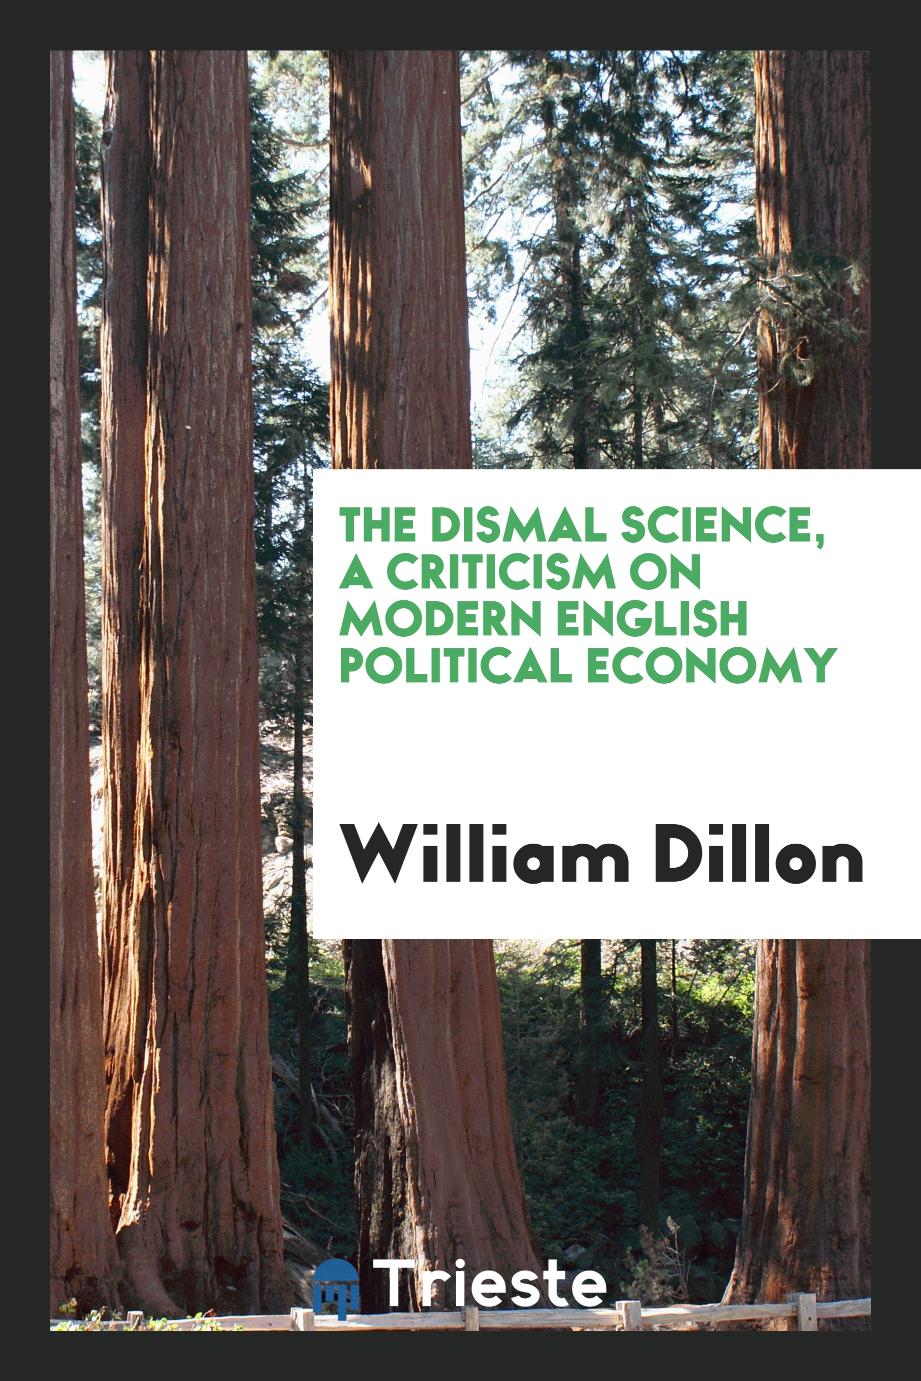 The dismal science, a criticism on modern English political economy